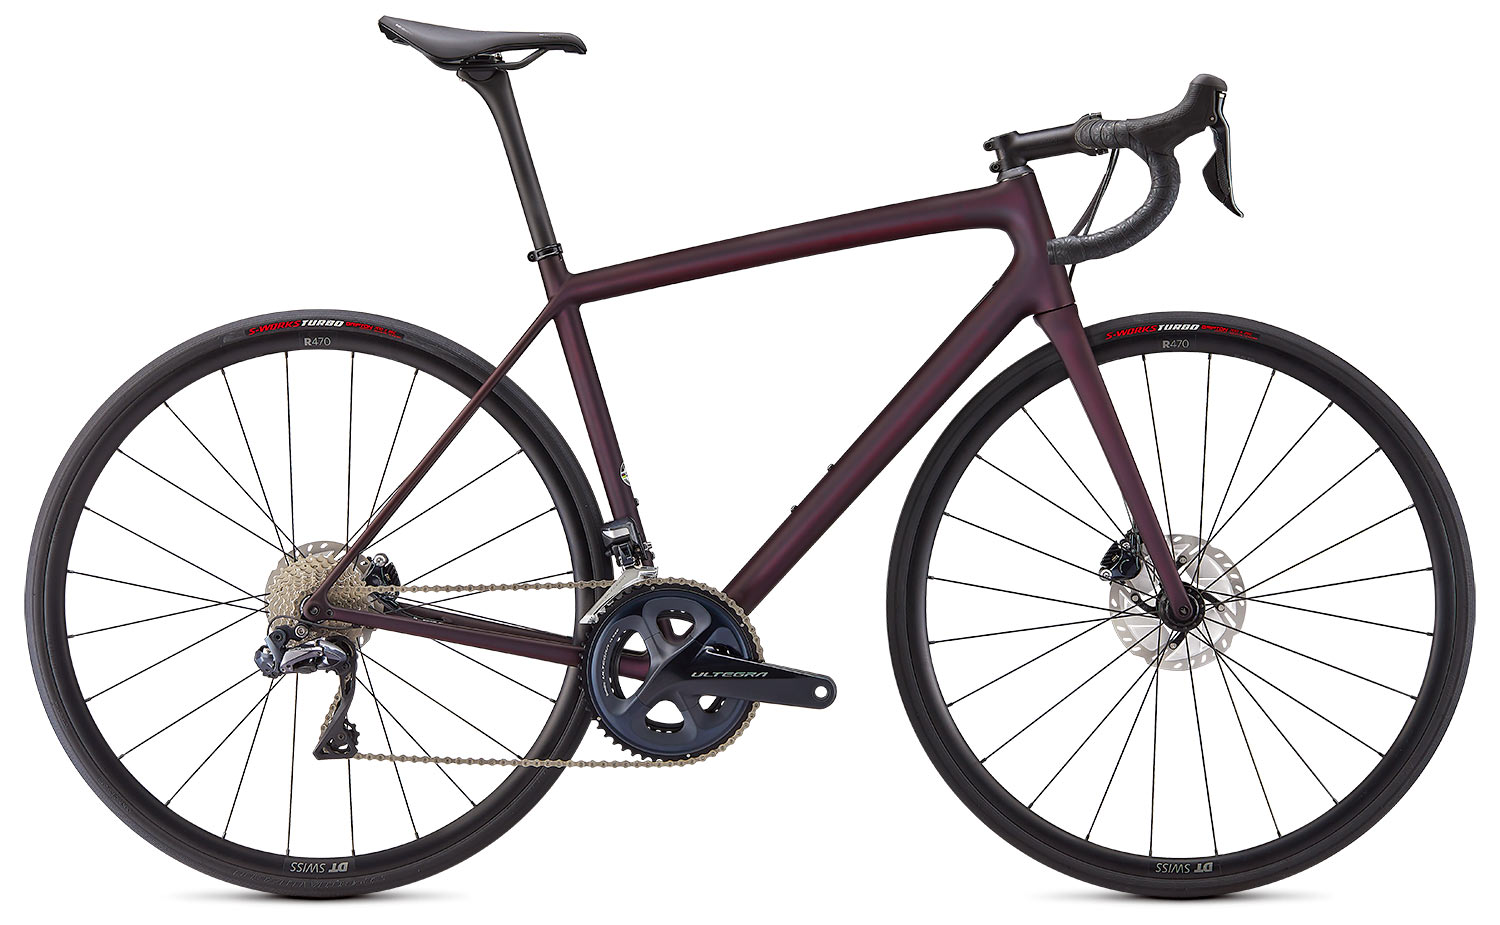 new specialized aethos lightweight carbon road bike in expert build trim and red tint paint scheme